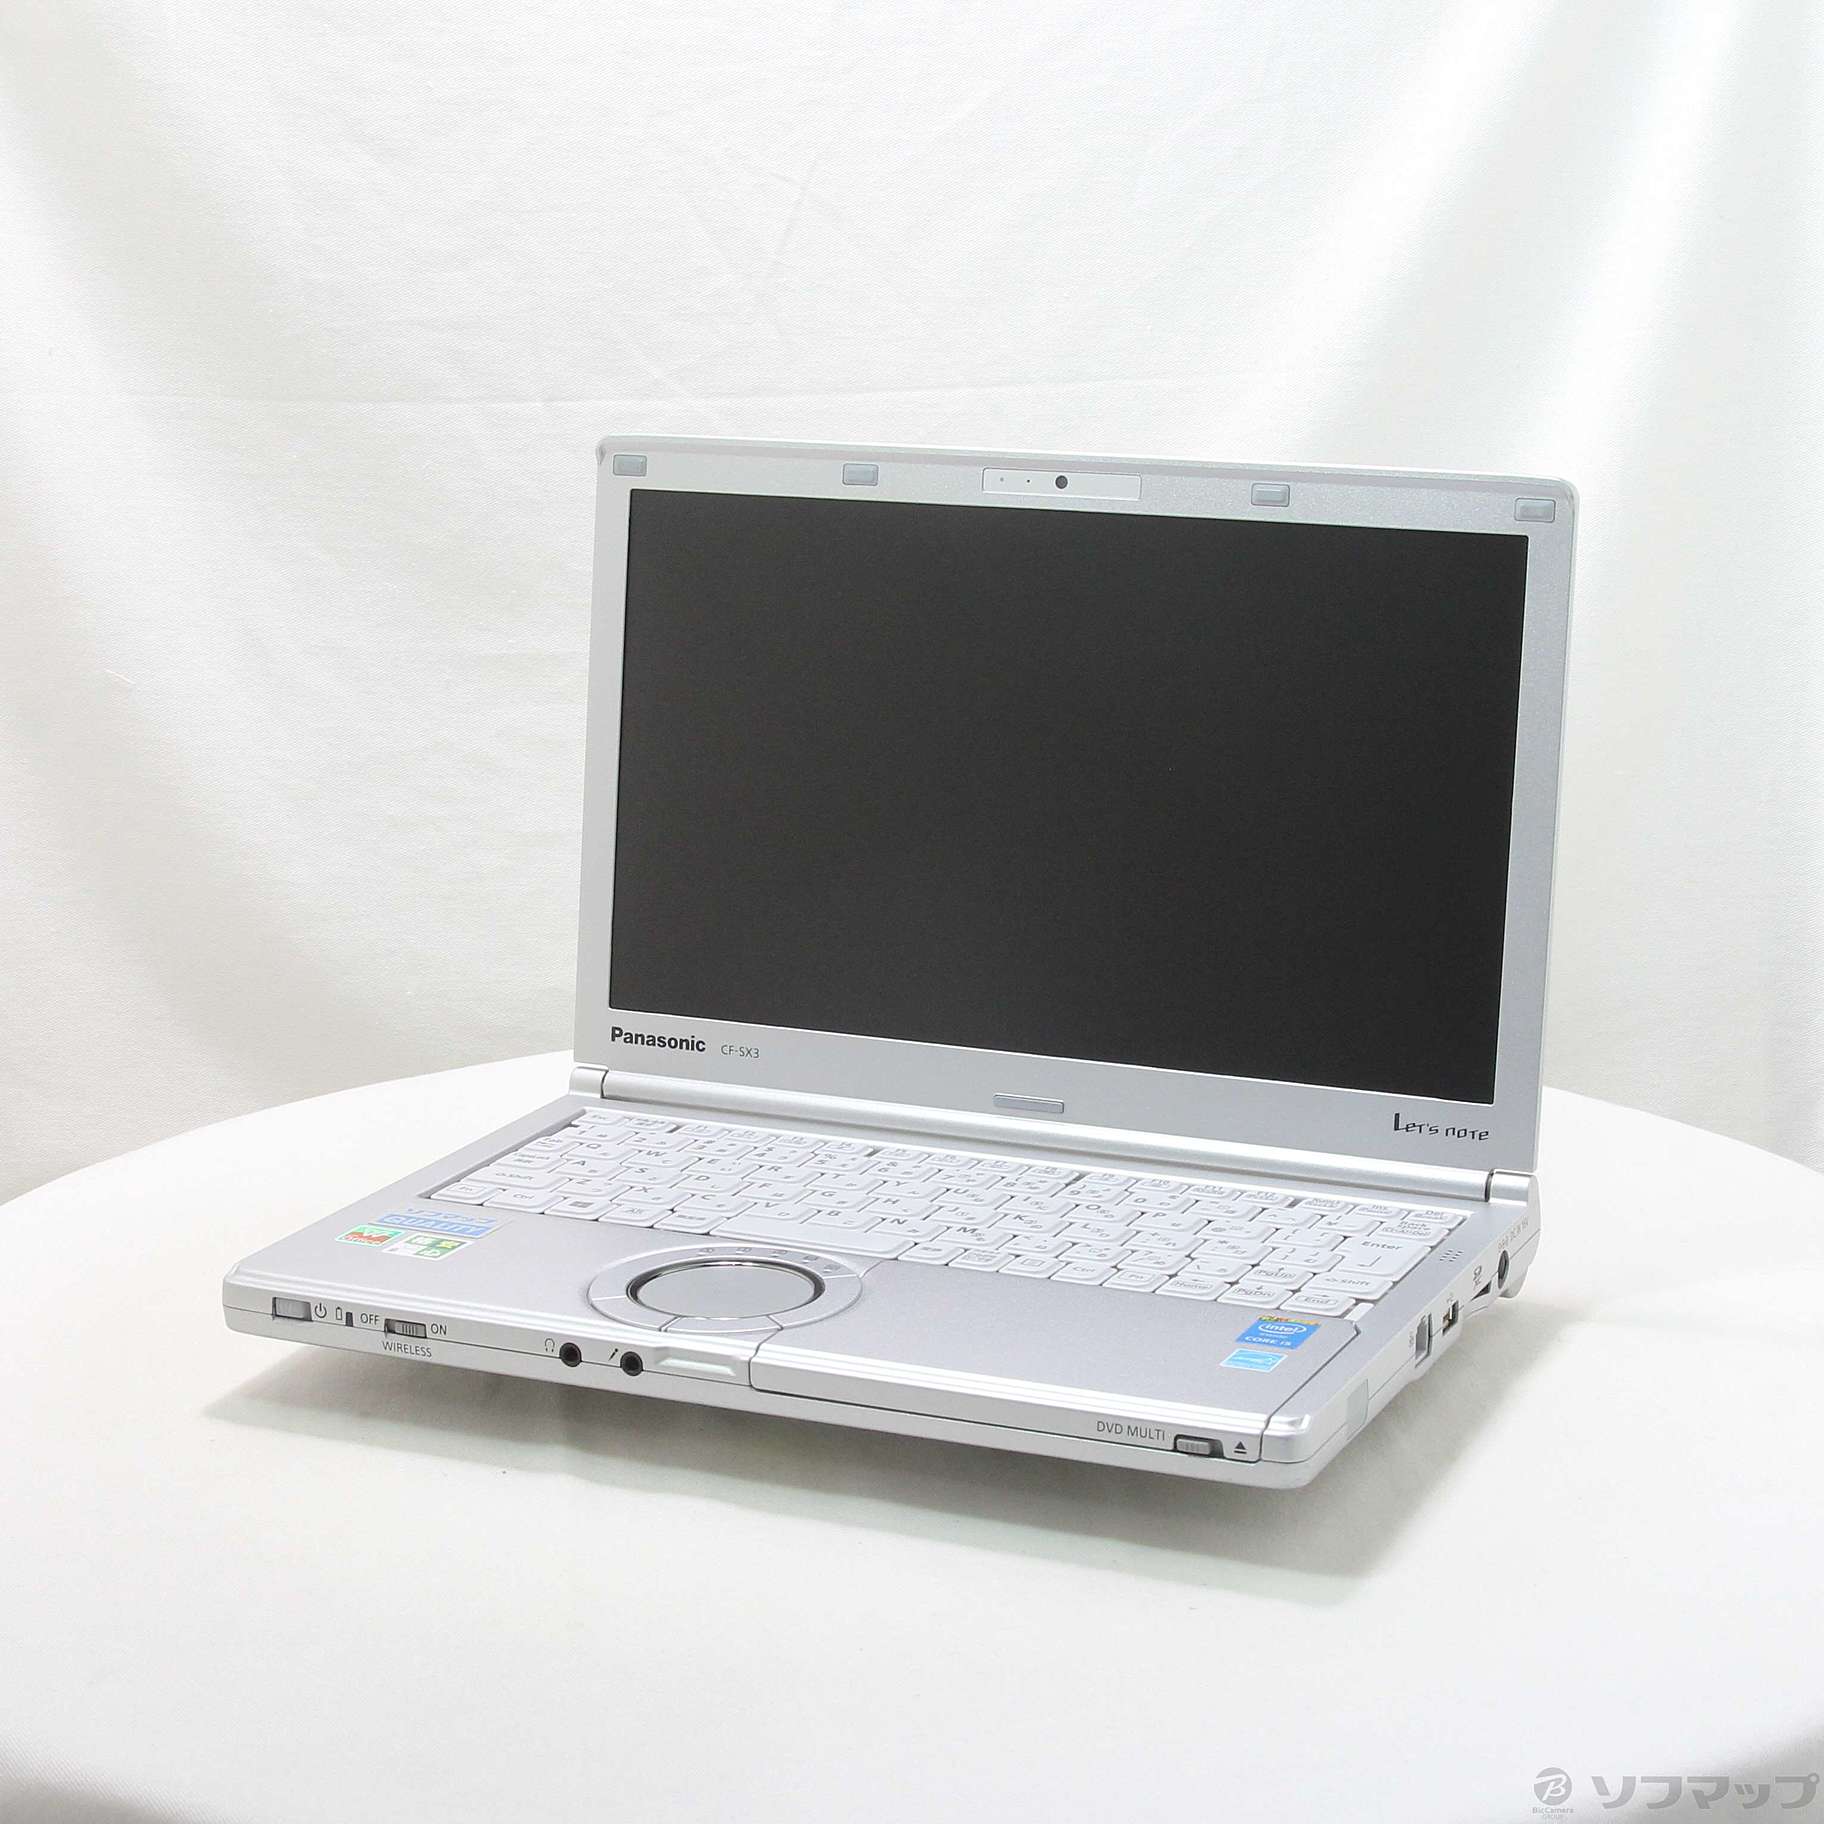 Let's Note SX3 4930h - ノートPC